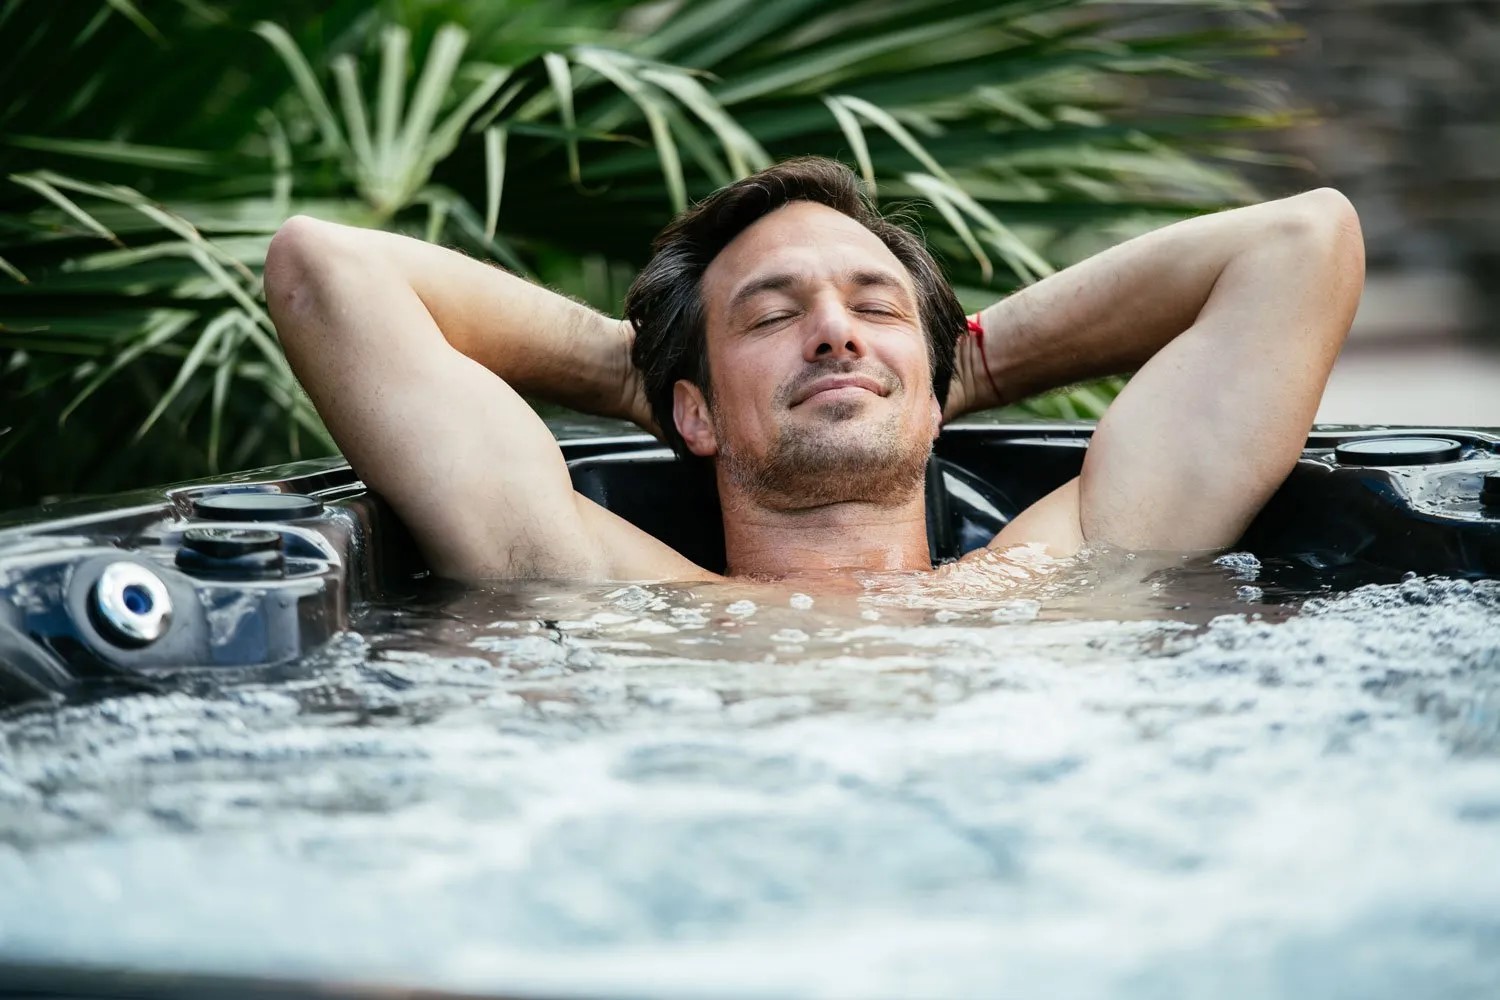 Why Does Hot Tub Make You Tired